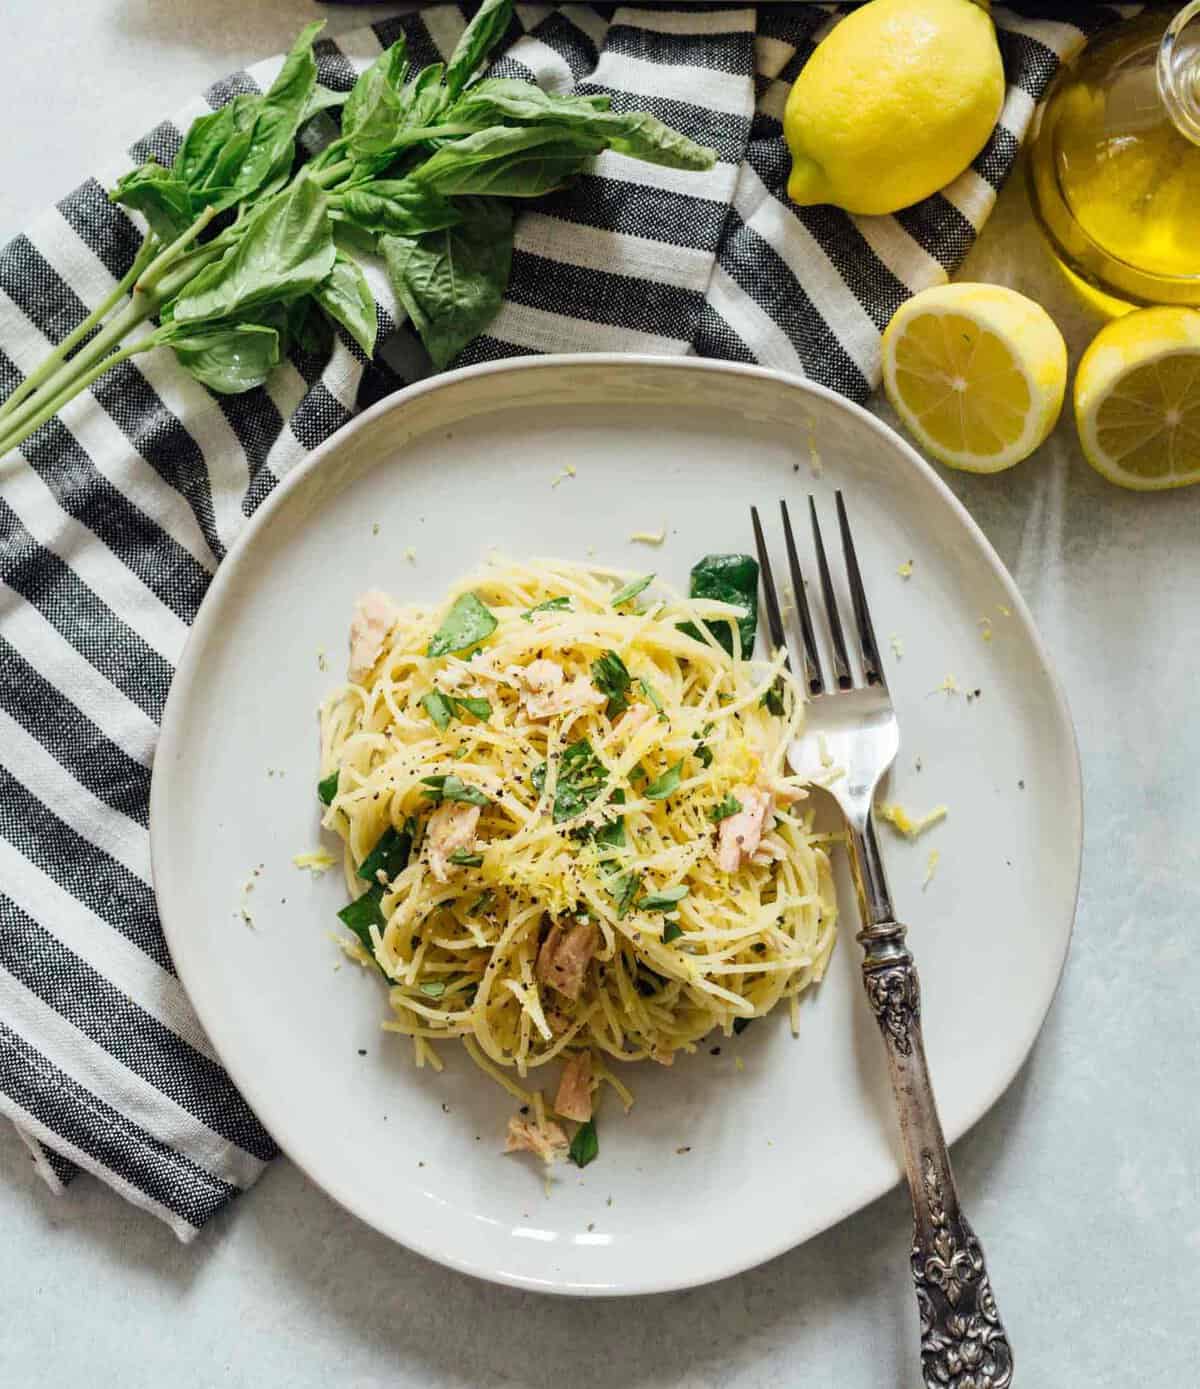 A refreshingly light yet bold and easy zesty pasta dish that uses canned tuna and lemon in a way that you may not have thought to use before!